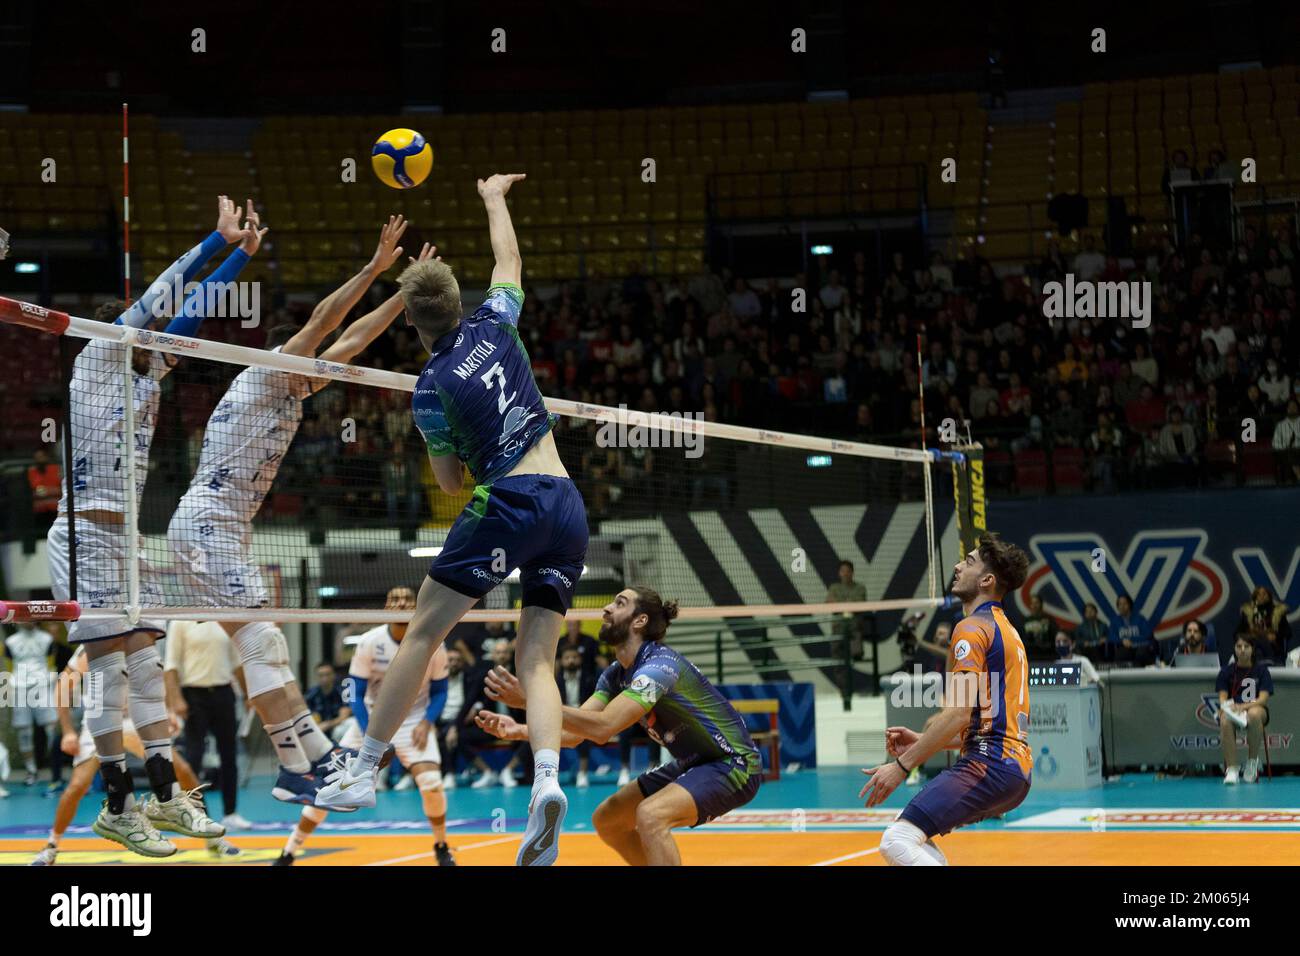 Monza, Italy. 04th Dec, 2022. Spike of Luka MARTTILA (Vero Volley Monza) during Vero Volley Monza vs Leo Shoes Modena, Volleyball Italian Serie A Men Superleague Championship in Monza, Italy, December 04 2022 Credit: Independent Photo Agency/Alamy Live News Stock Photo